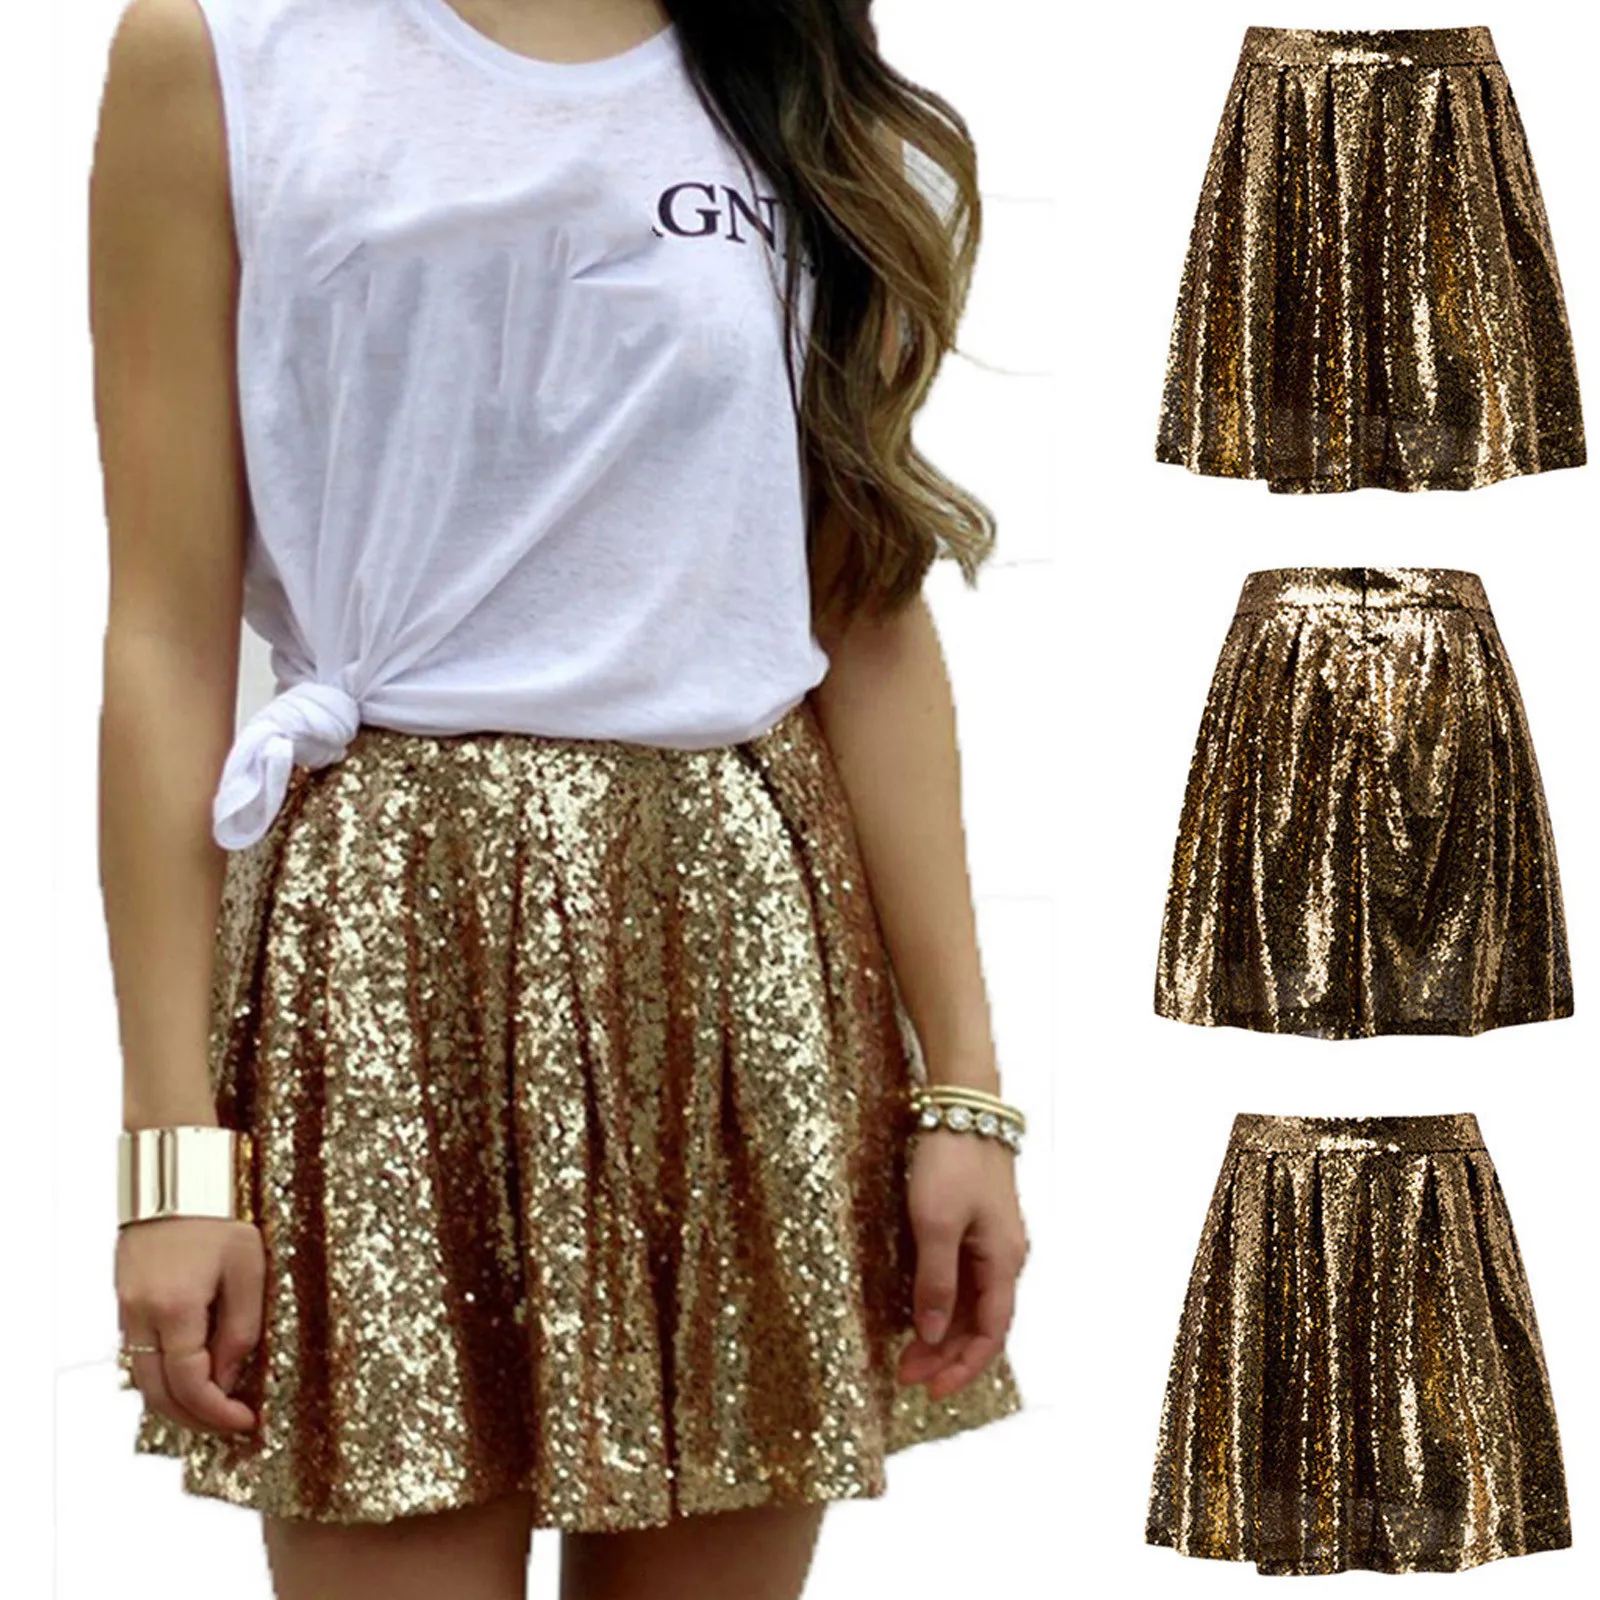 Skirts Women's Fashion High Waist Pleated Gold A-line Short Skirt Loose Sequin Skirts Party Pleated Skirt Night Club Dance Mini Skirt 230717